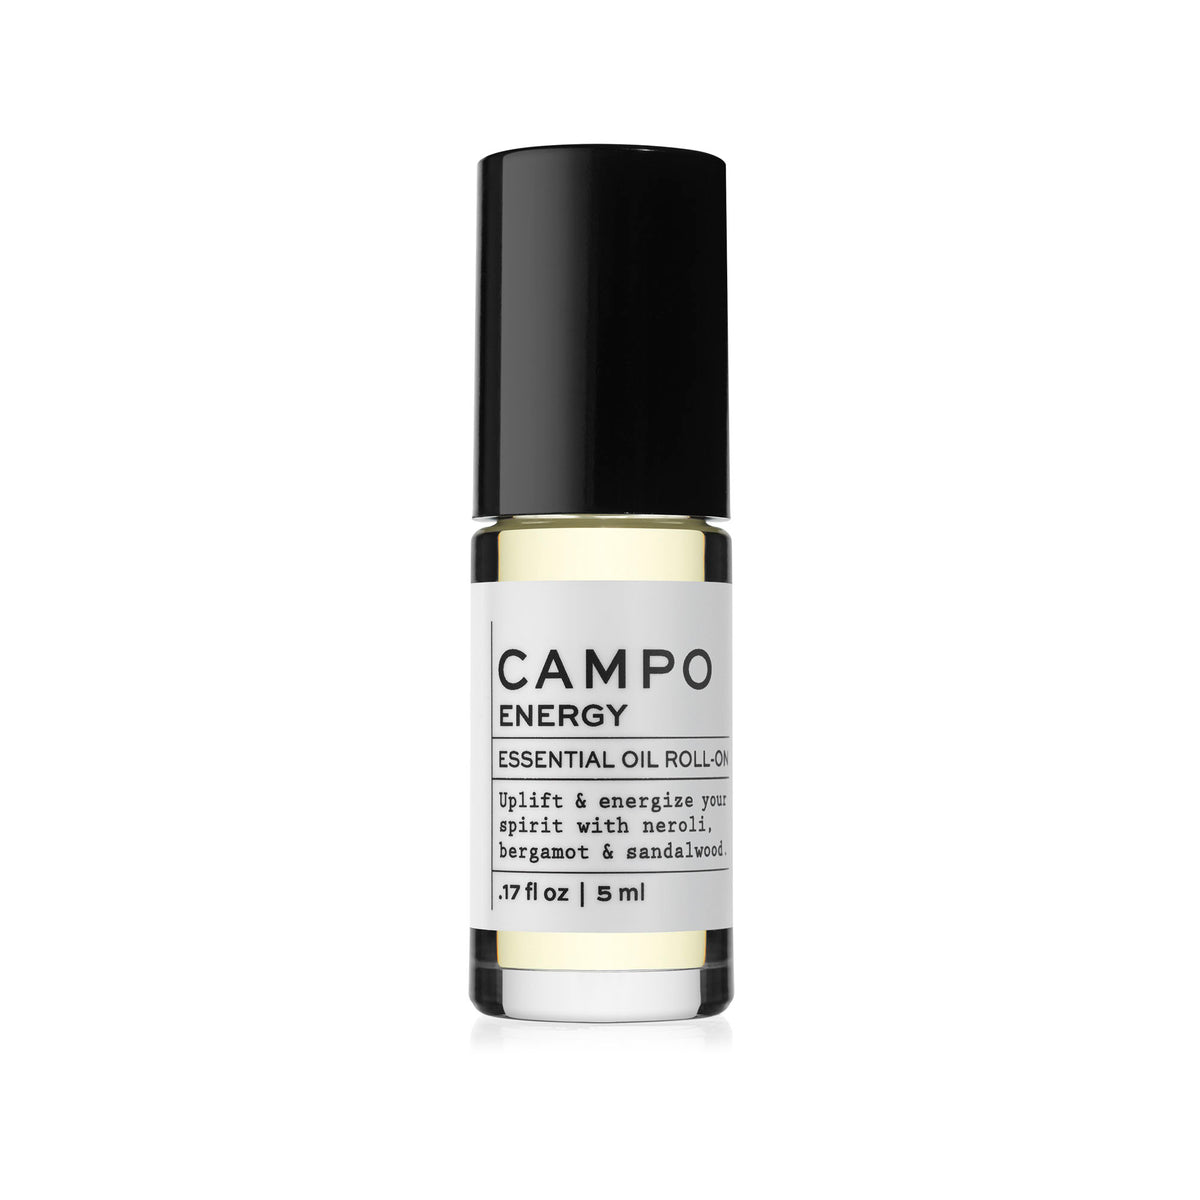 Campo Beauty ENERGY Blend Essential Oil Roll-On in 5 ml. Restores a sense of vitality and alertness. Uplift &amp; energize your spirits naturally with this 100% pure essential oil roll-on blend of Neroli Orange Blossom, Bergamot, Sweet Orange, and Bitter Orange with a hint of Sandalwood. A refreshing and distinctive rich citrus scent with sweet and flowery notes. Pre-blended with 100% natural beauty carrier oils, so it&#39;s jet-set and ready to roll!